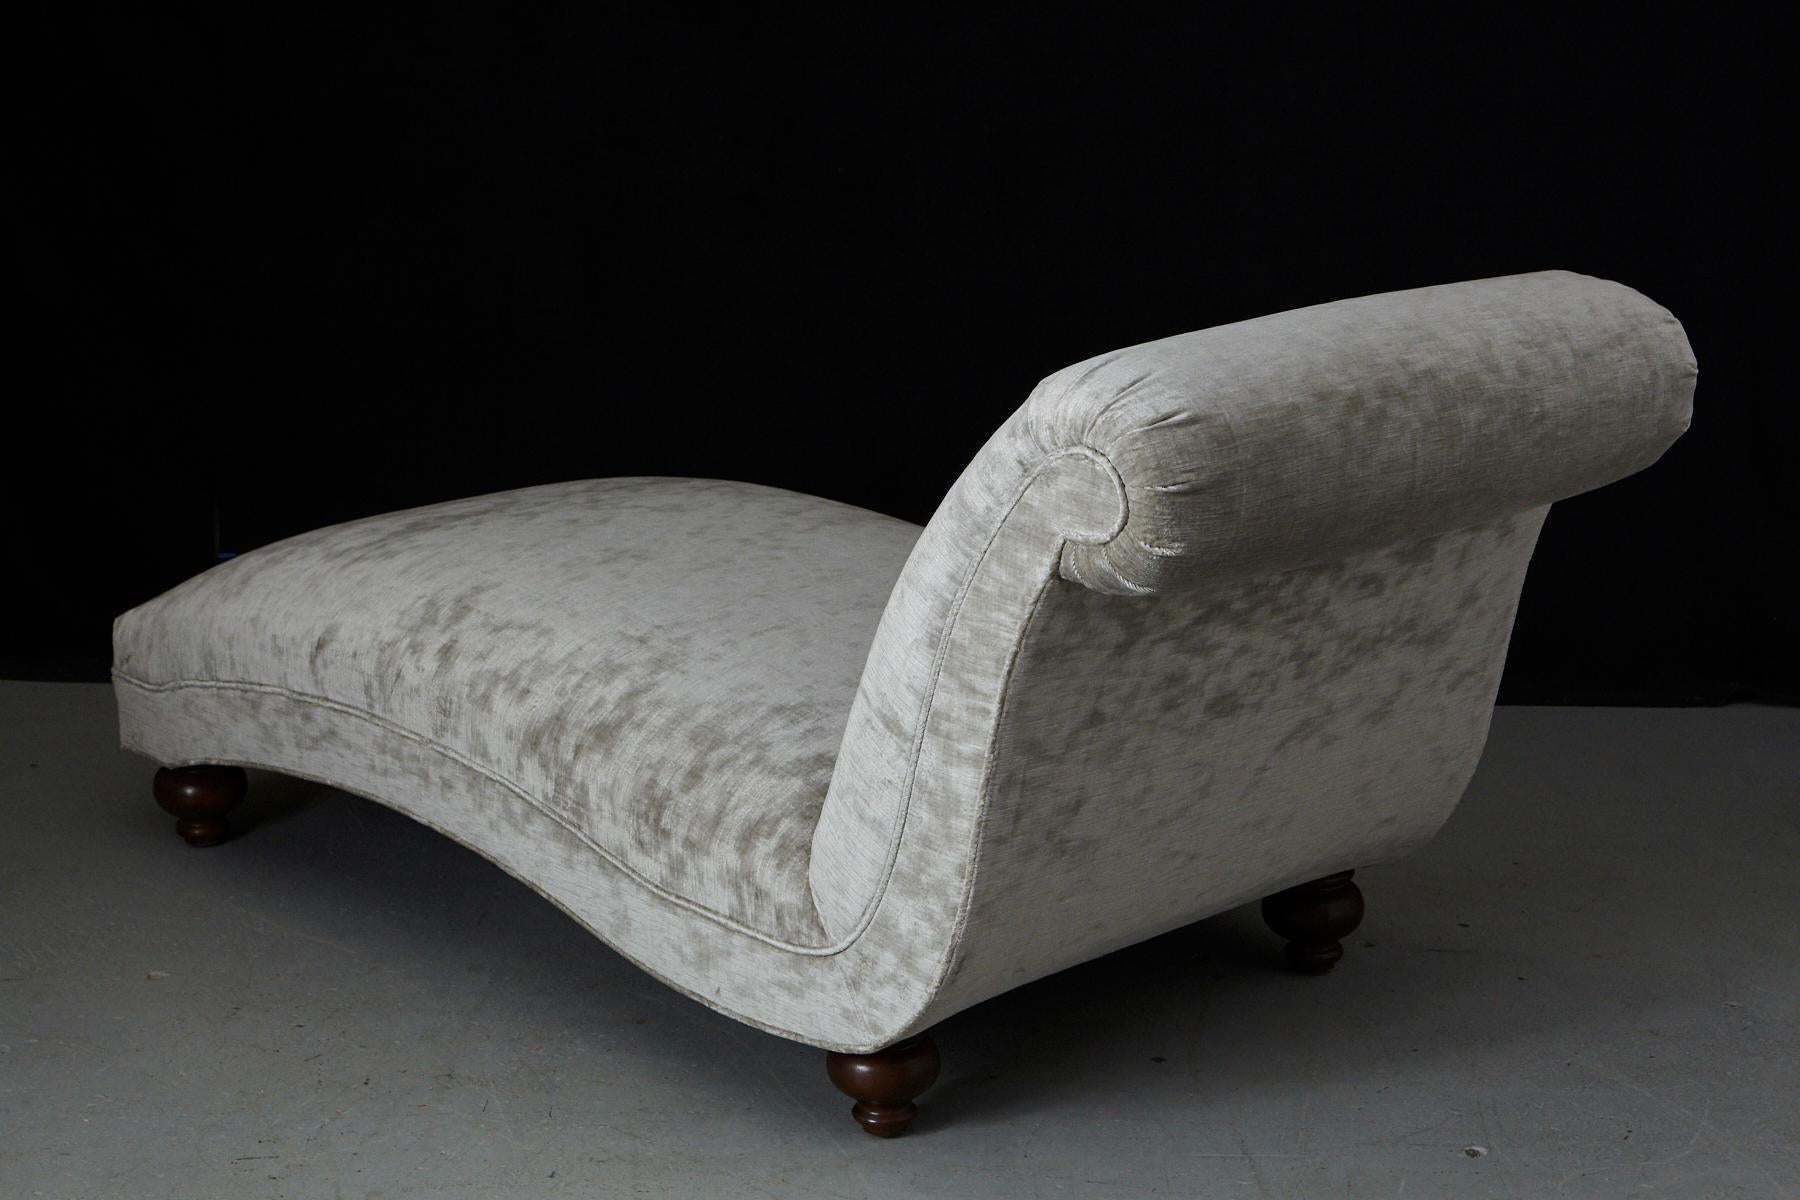 French Chaise Longue with New Upholstery in Striae Velvet, circa 1930s For Sale 2